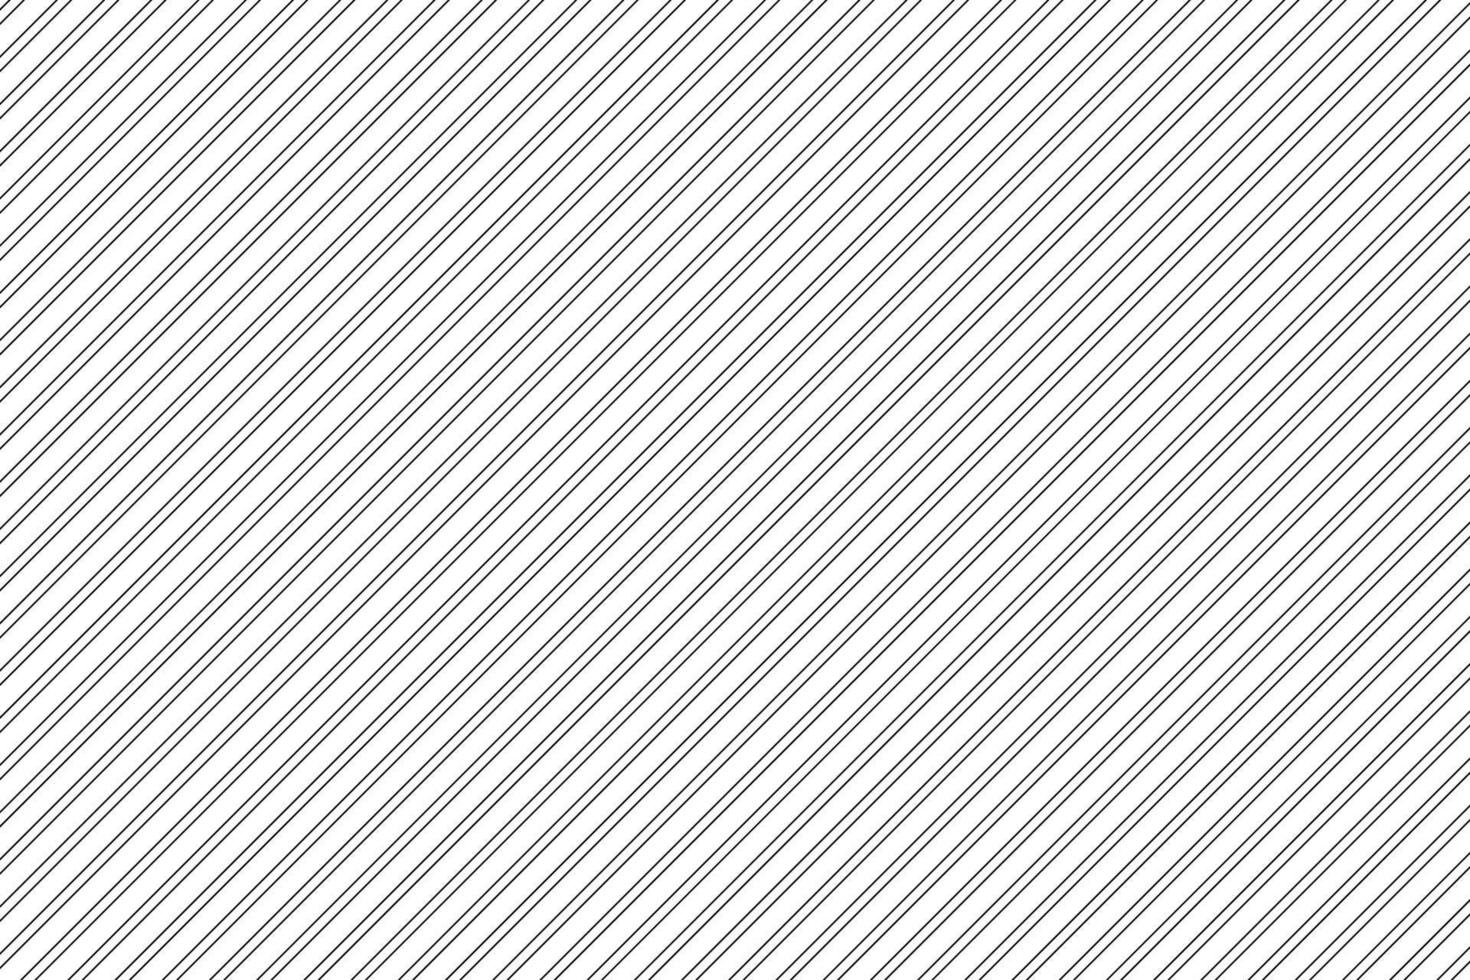 abstract diagonal stripe straight line pattern design. vector